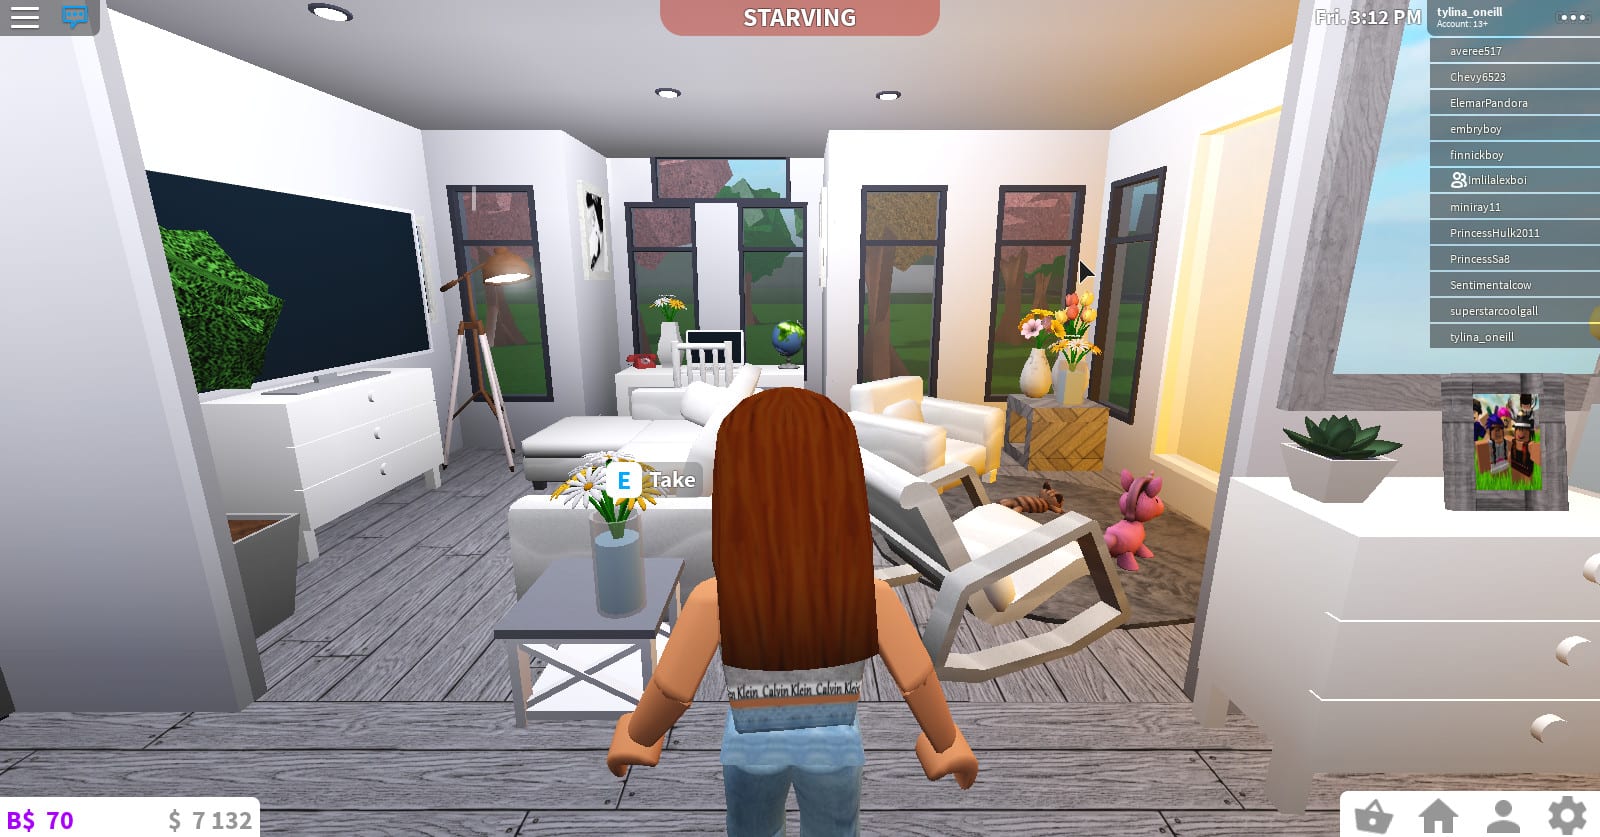 Roblox Bloxburg Builder I Can Build Cafe Hotel Towns Apartments By Tylinaoneill123